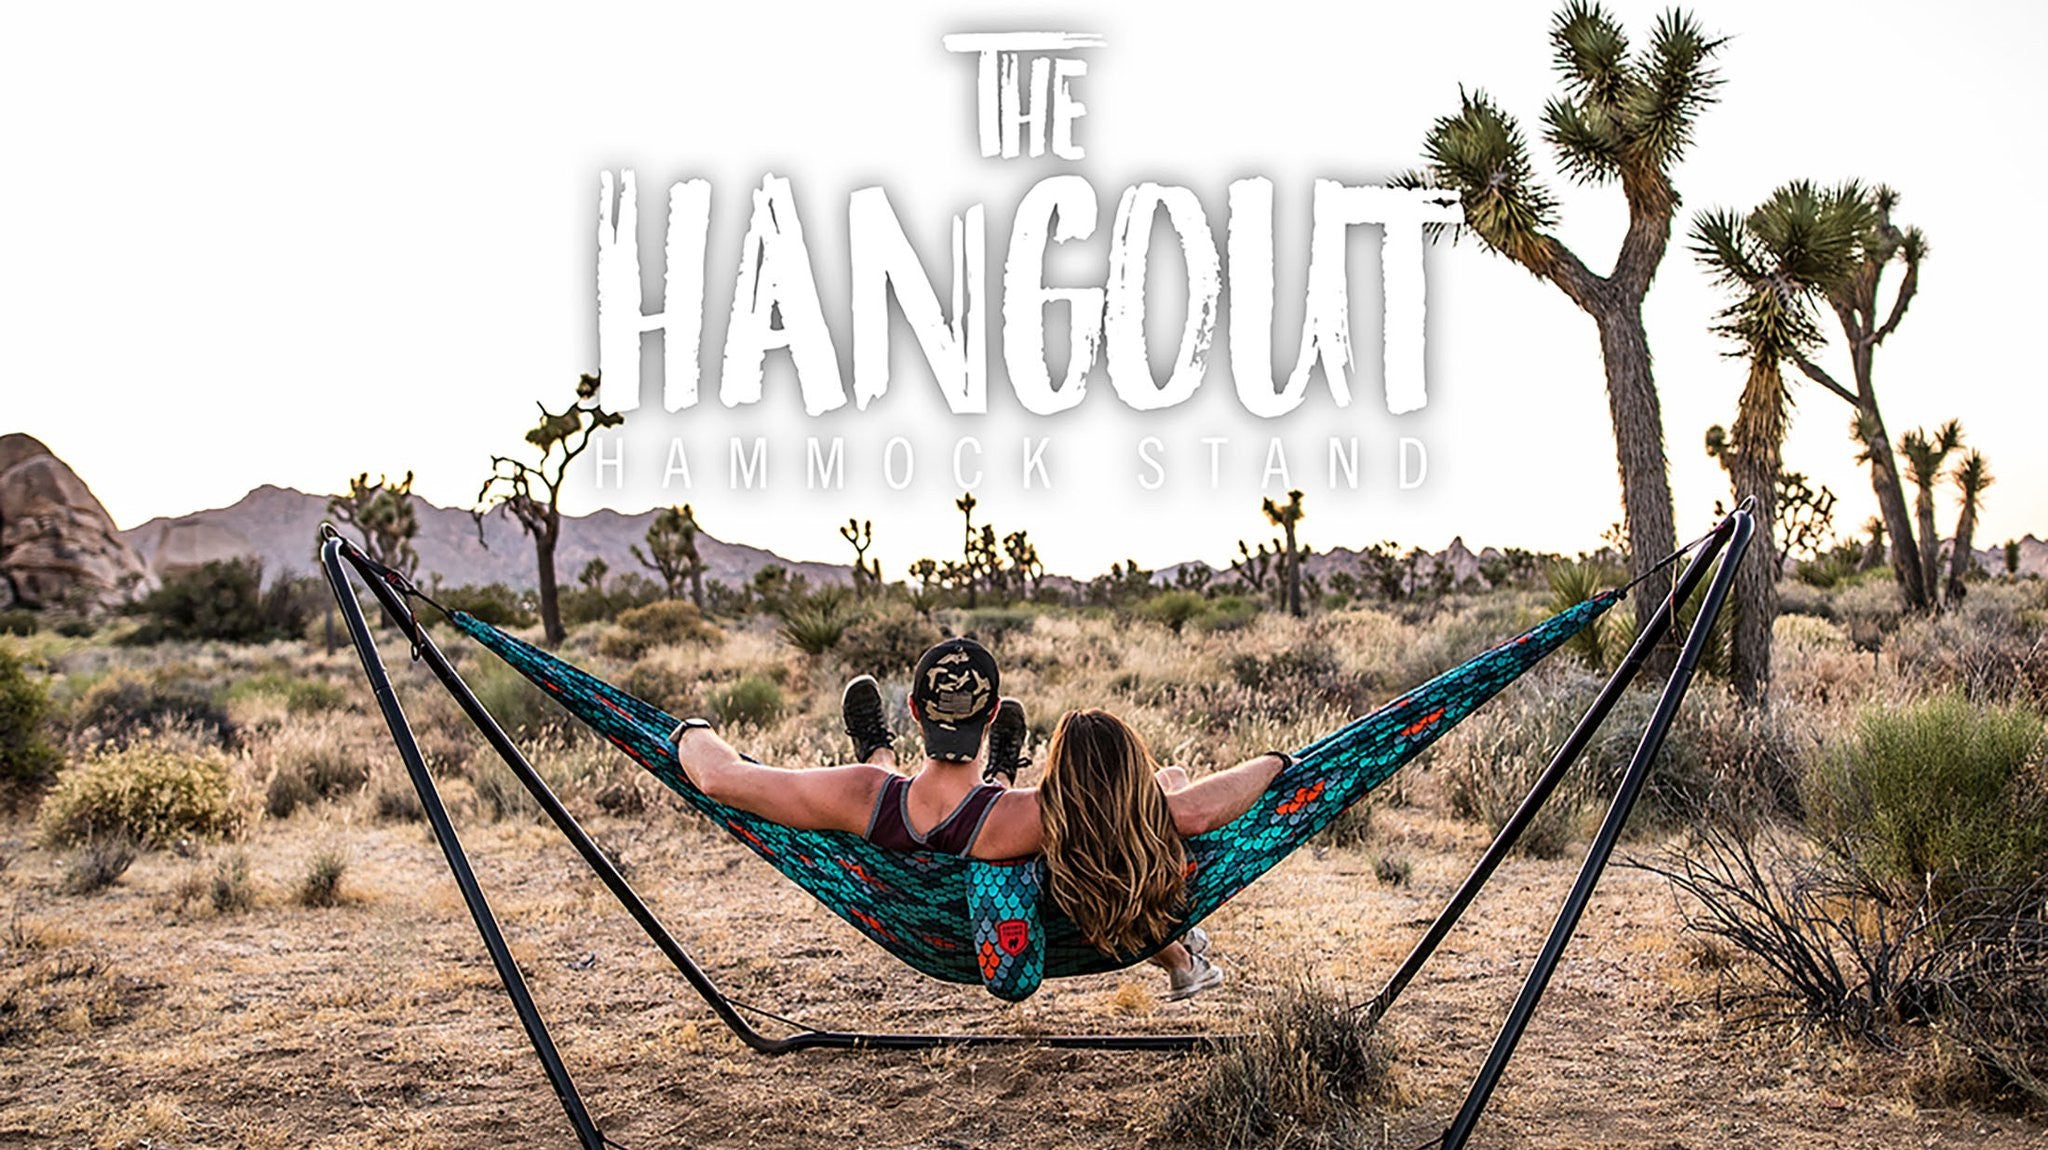 Hammock Without Trees Using a Hammock Stand